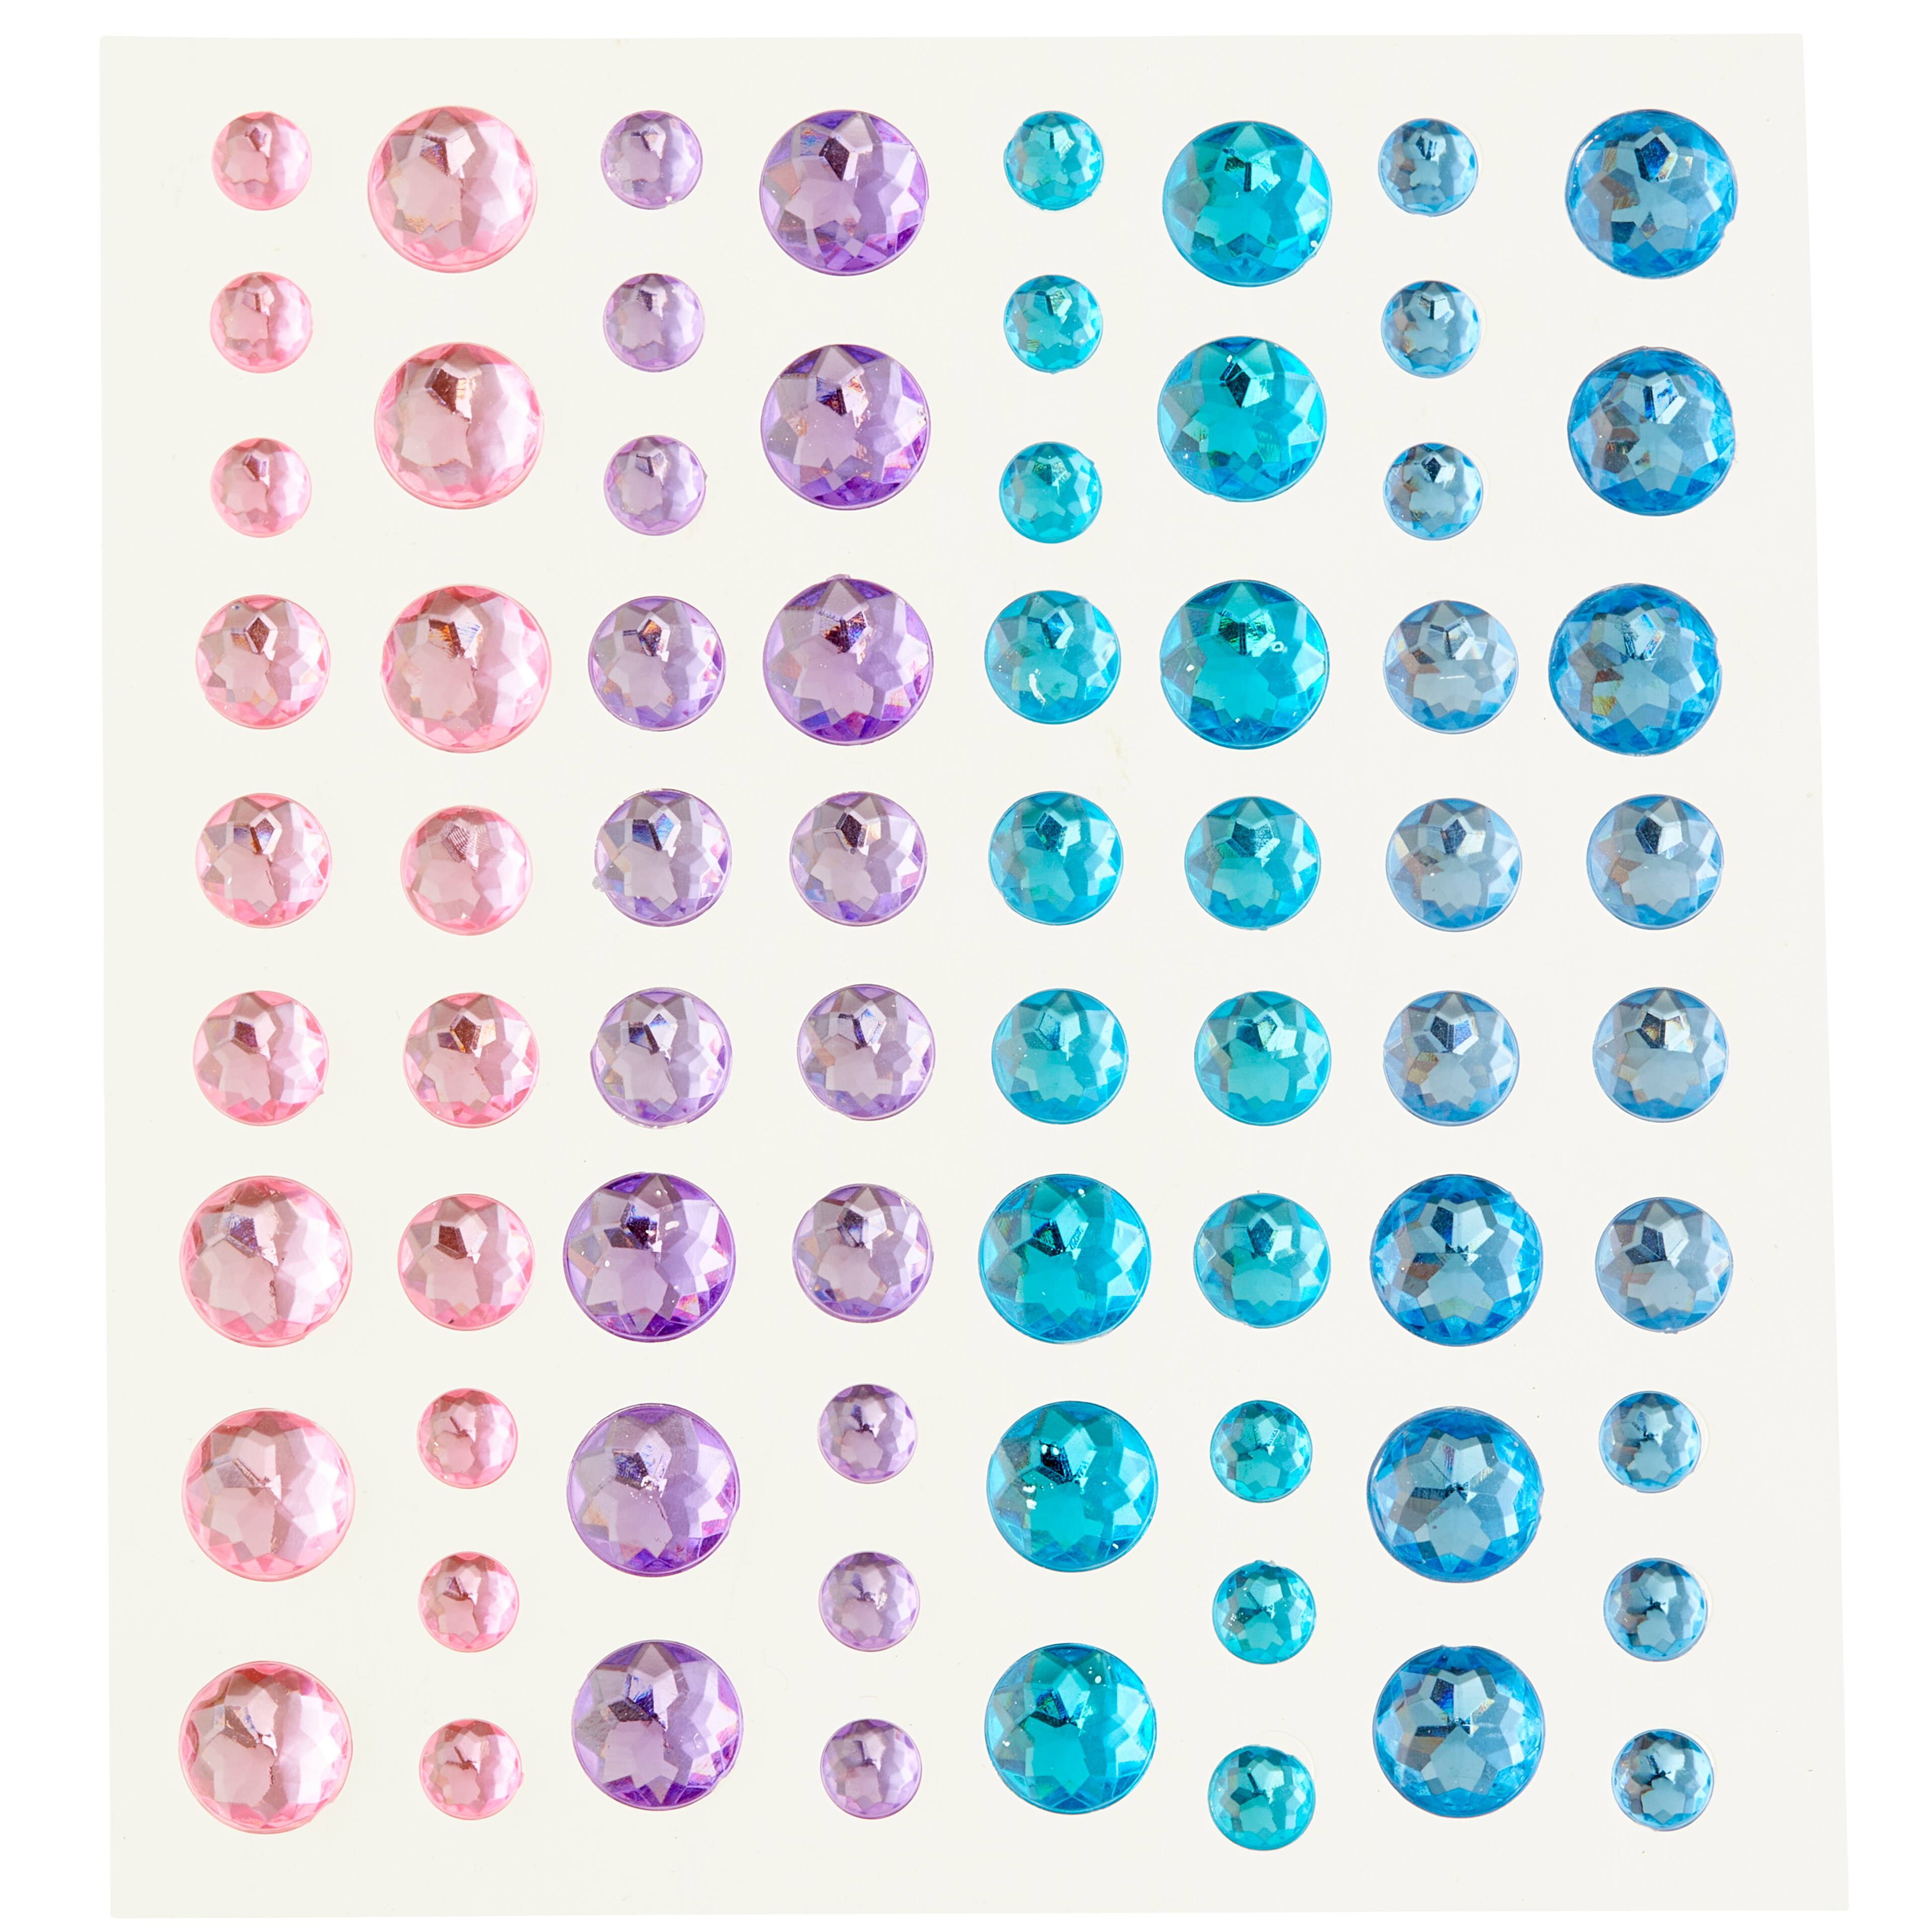 12 Packs: 72 ct. (864 total) Pastel Rhinestone Stickers by Recollections&#x2122;